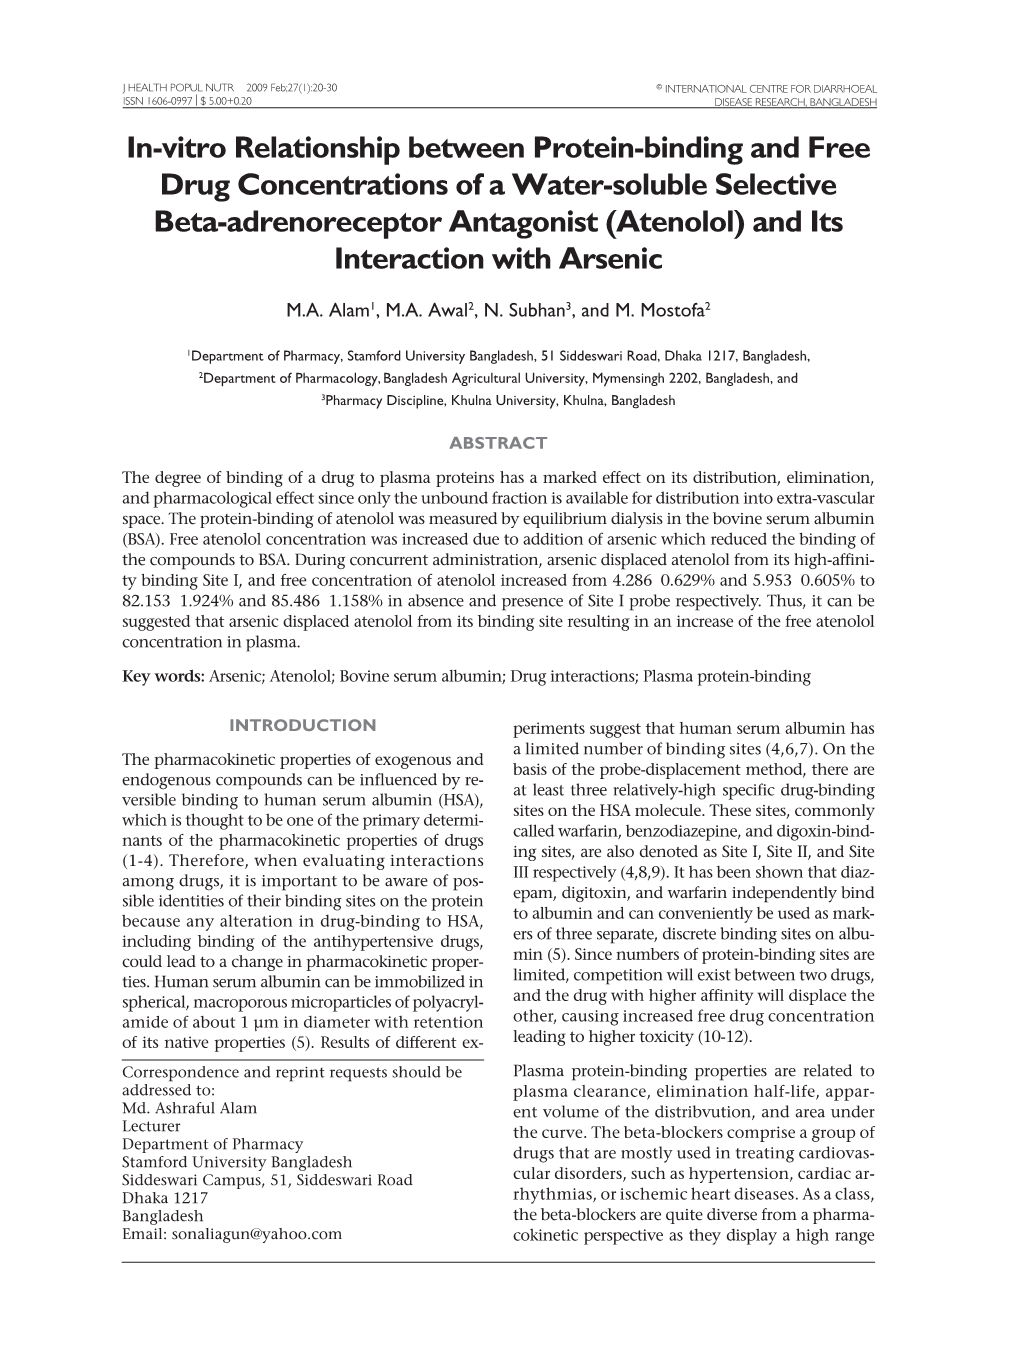 In-Vitro Relationship Between Protein-Binding and Free Drug Concentrations of a Water-Soluble Selective Beta-Adrenoreceptor Anta